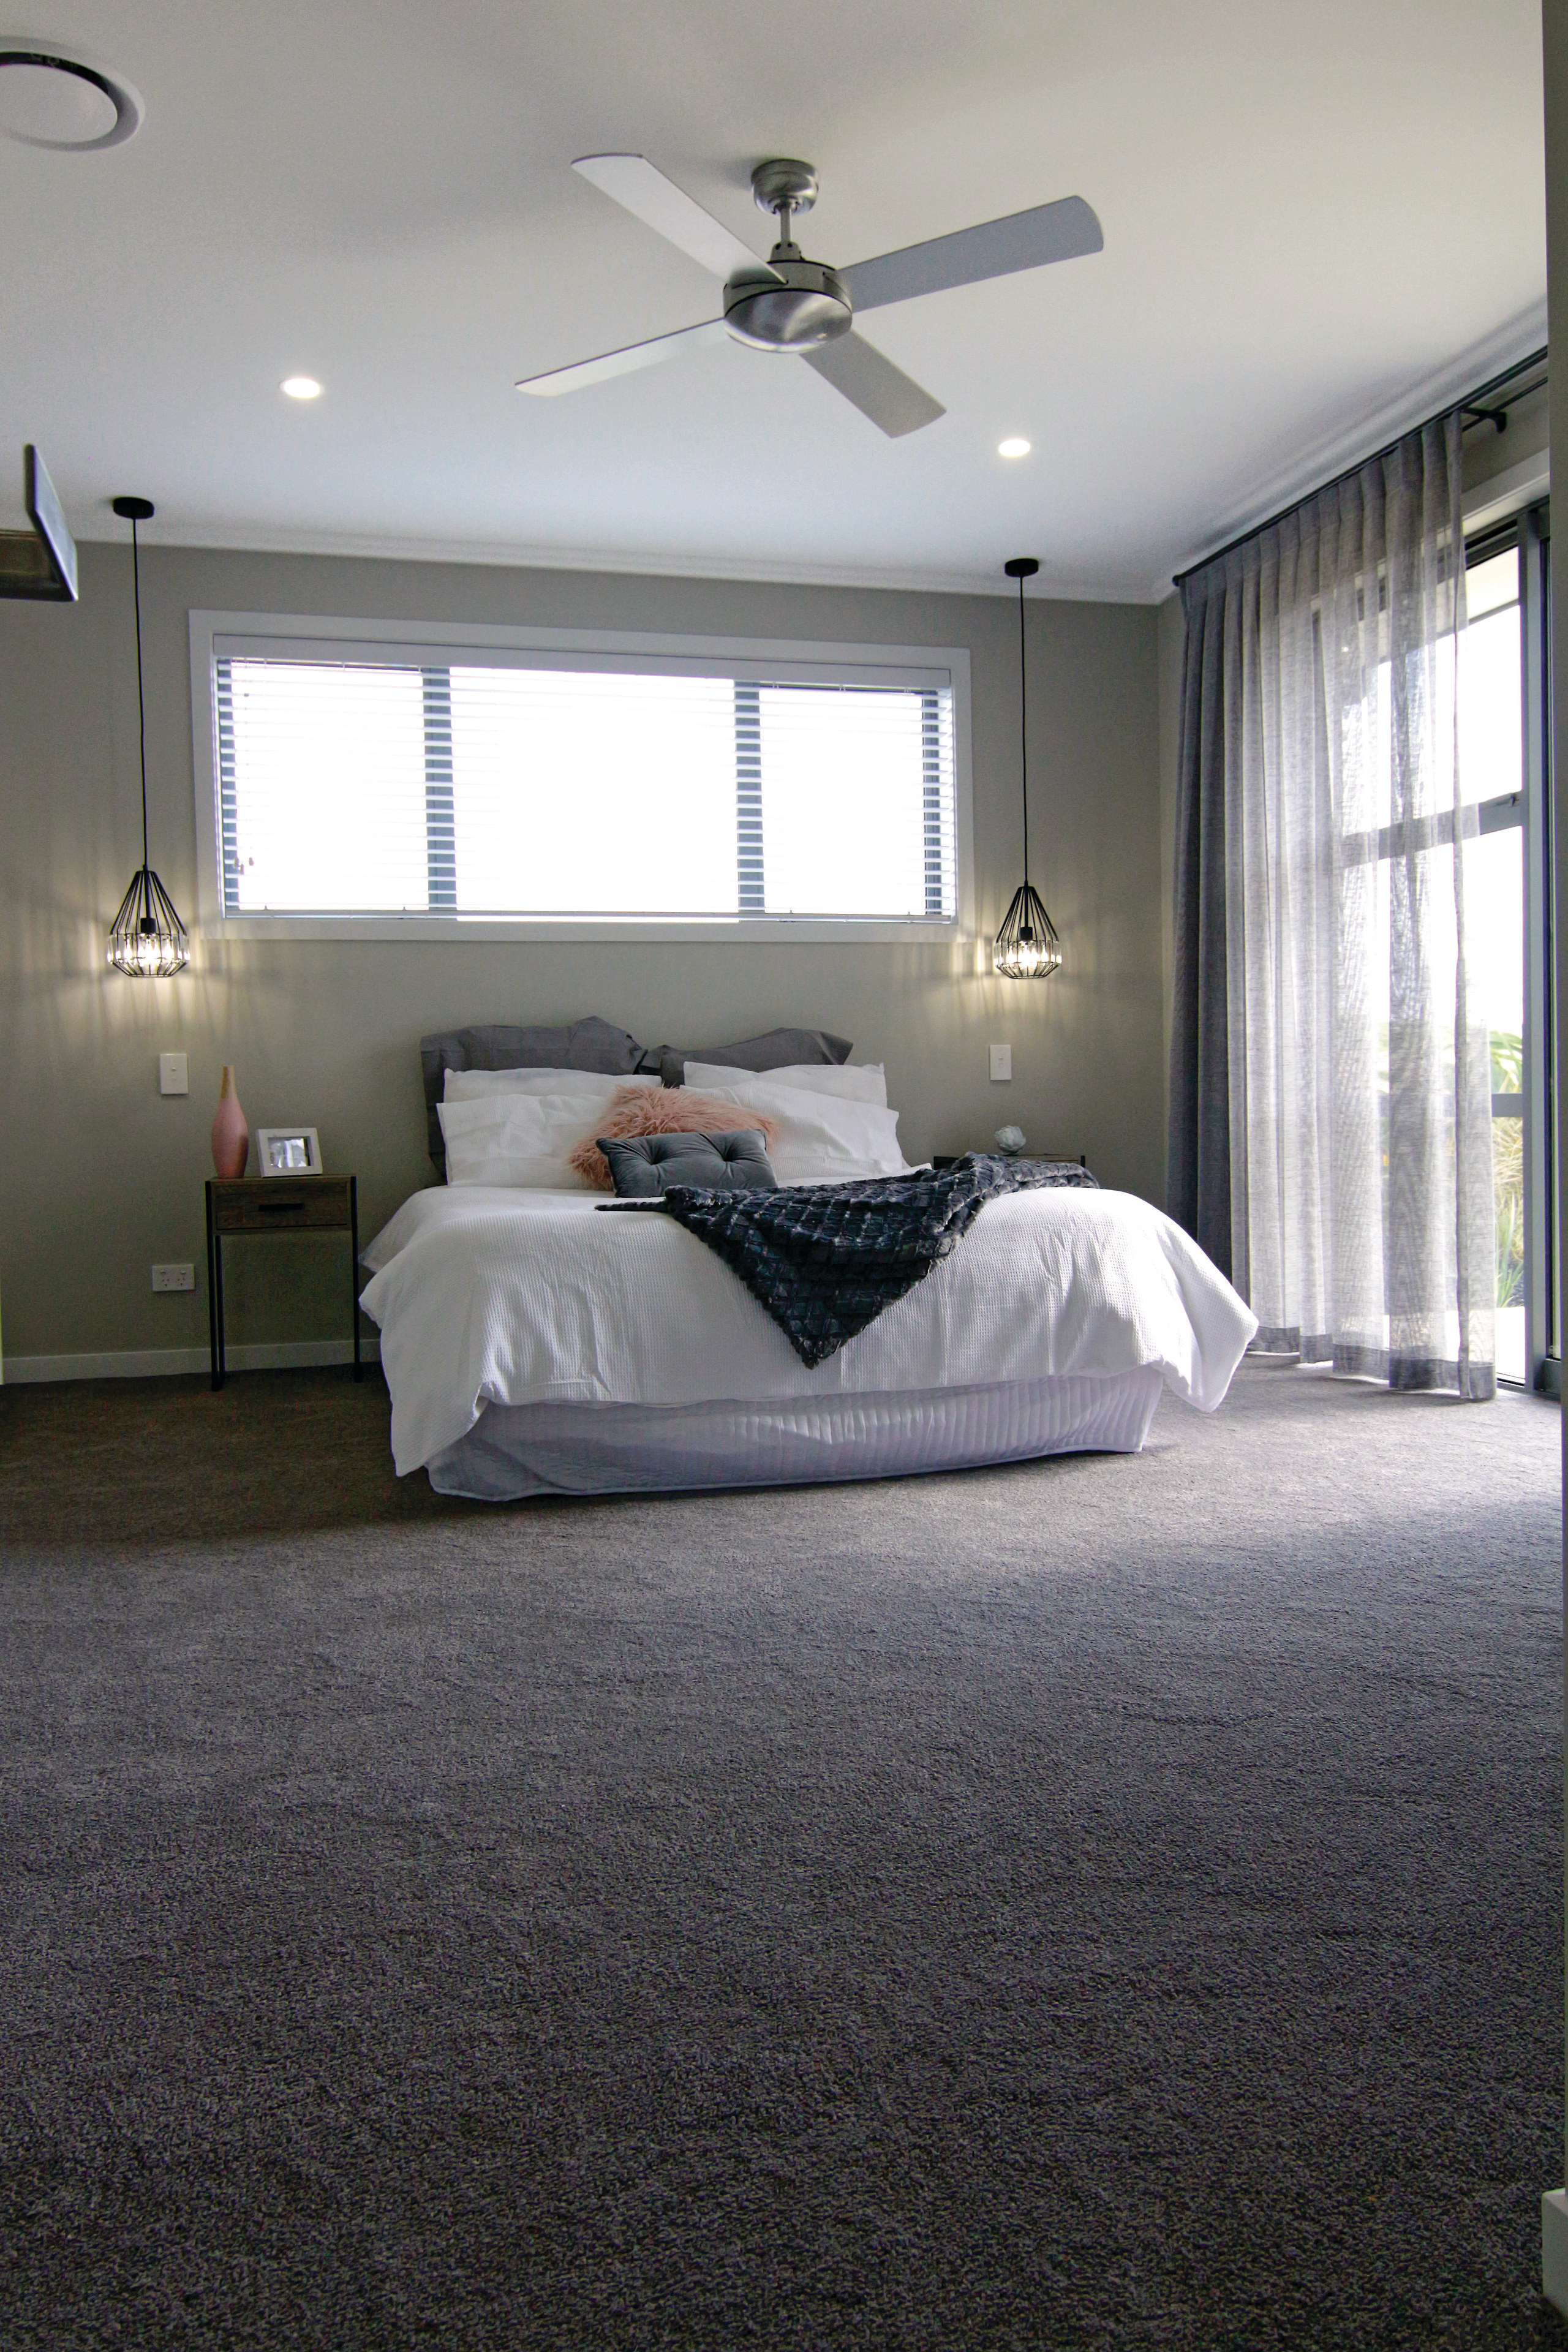 The master bedroom in this Fowler Homes Orewa architecture, bed frame, bedroom, ceiling, floor, room, gray, black